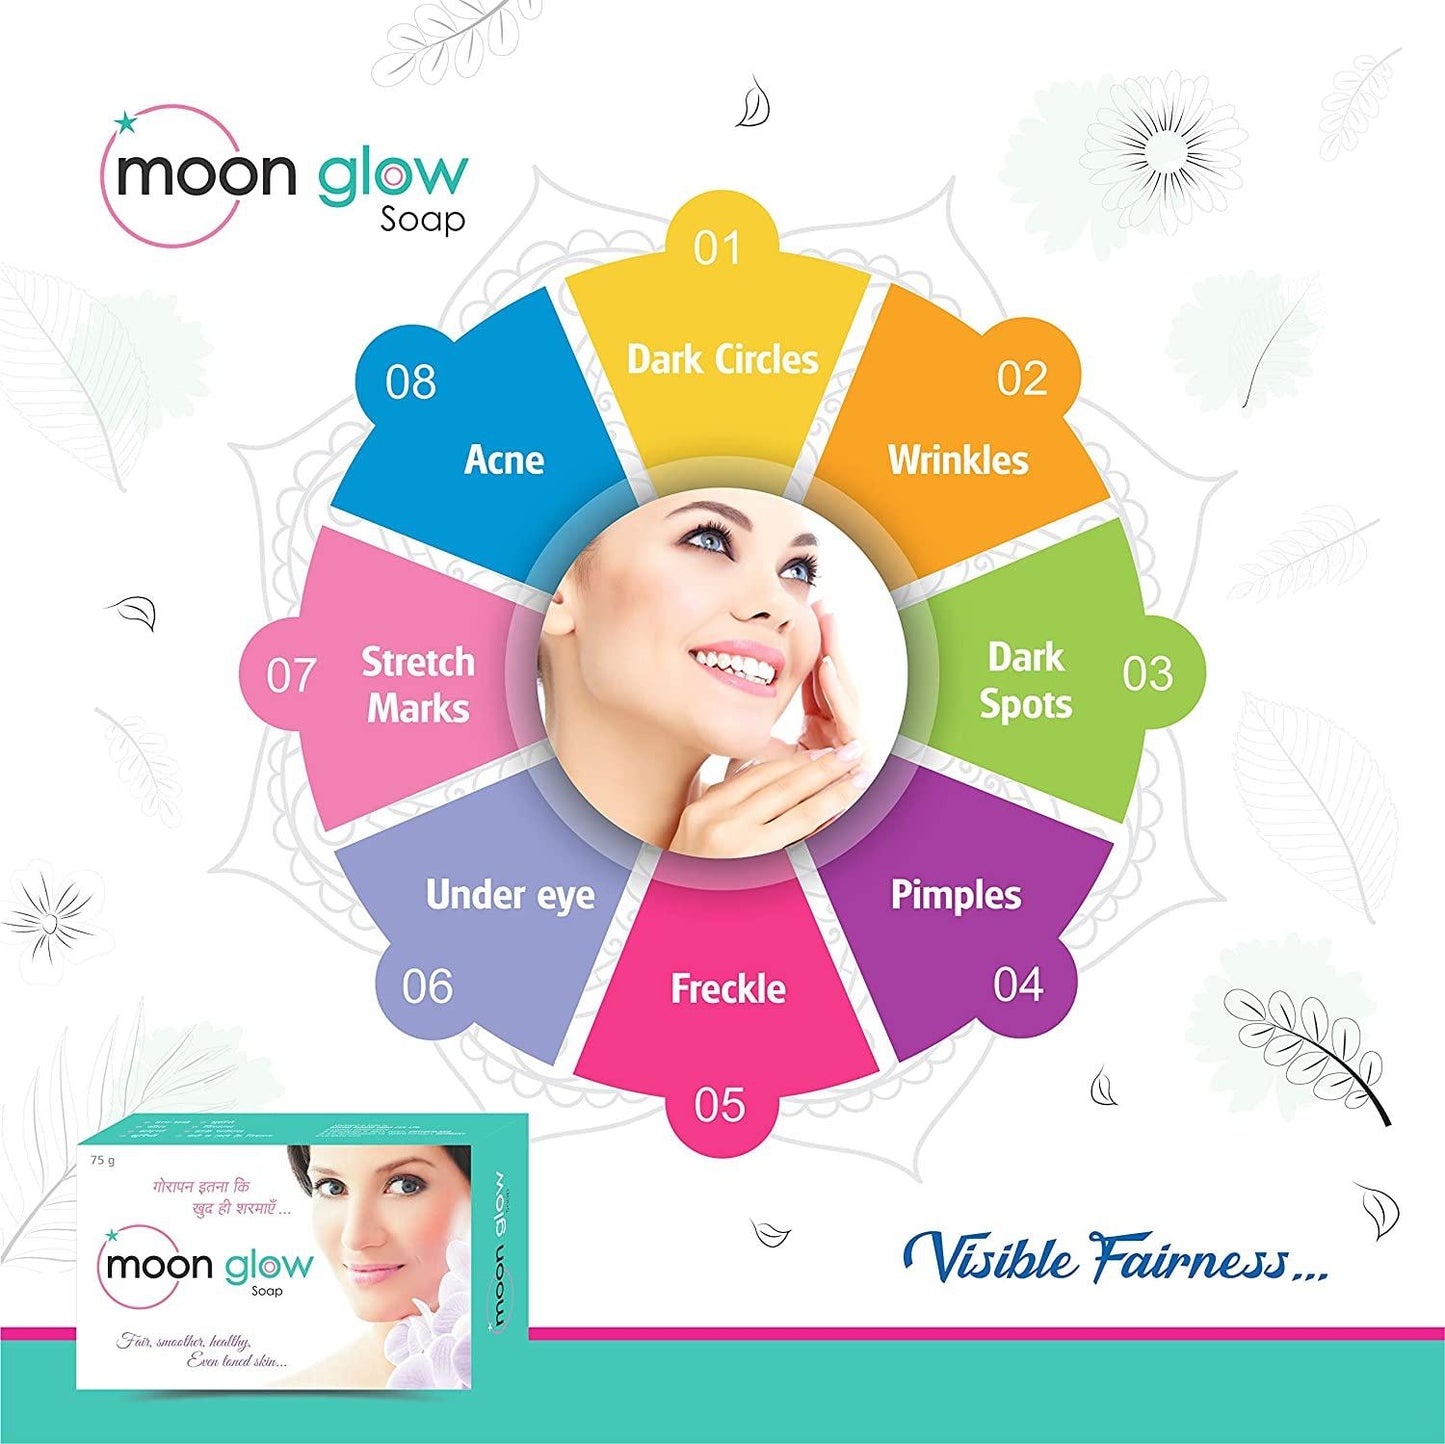 Moon Glow 2 Cream, 2 Pearl Face Wash and 2 Soap Combo Pack for Acne, Pimples, Black Spots, Dark Circles, Stretch Marks, Anti-Aging and Fairness (2 Cream + 2 Pearl Face Wash +2 Soap) - Olefia Biopharma Limited